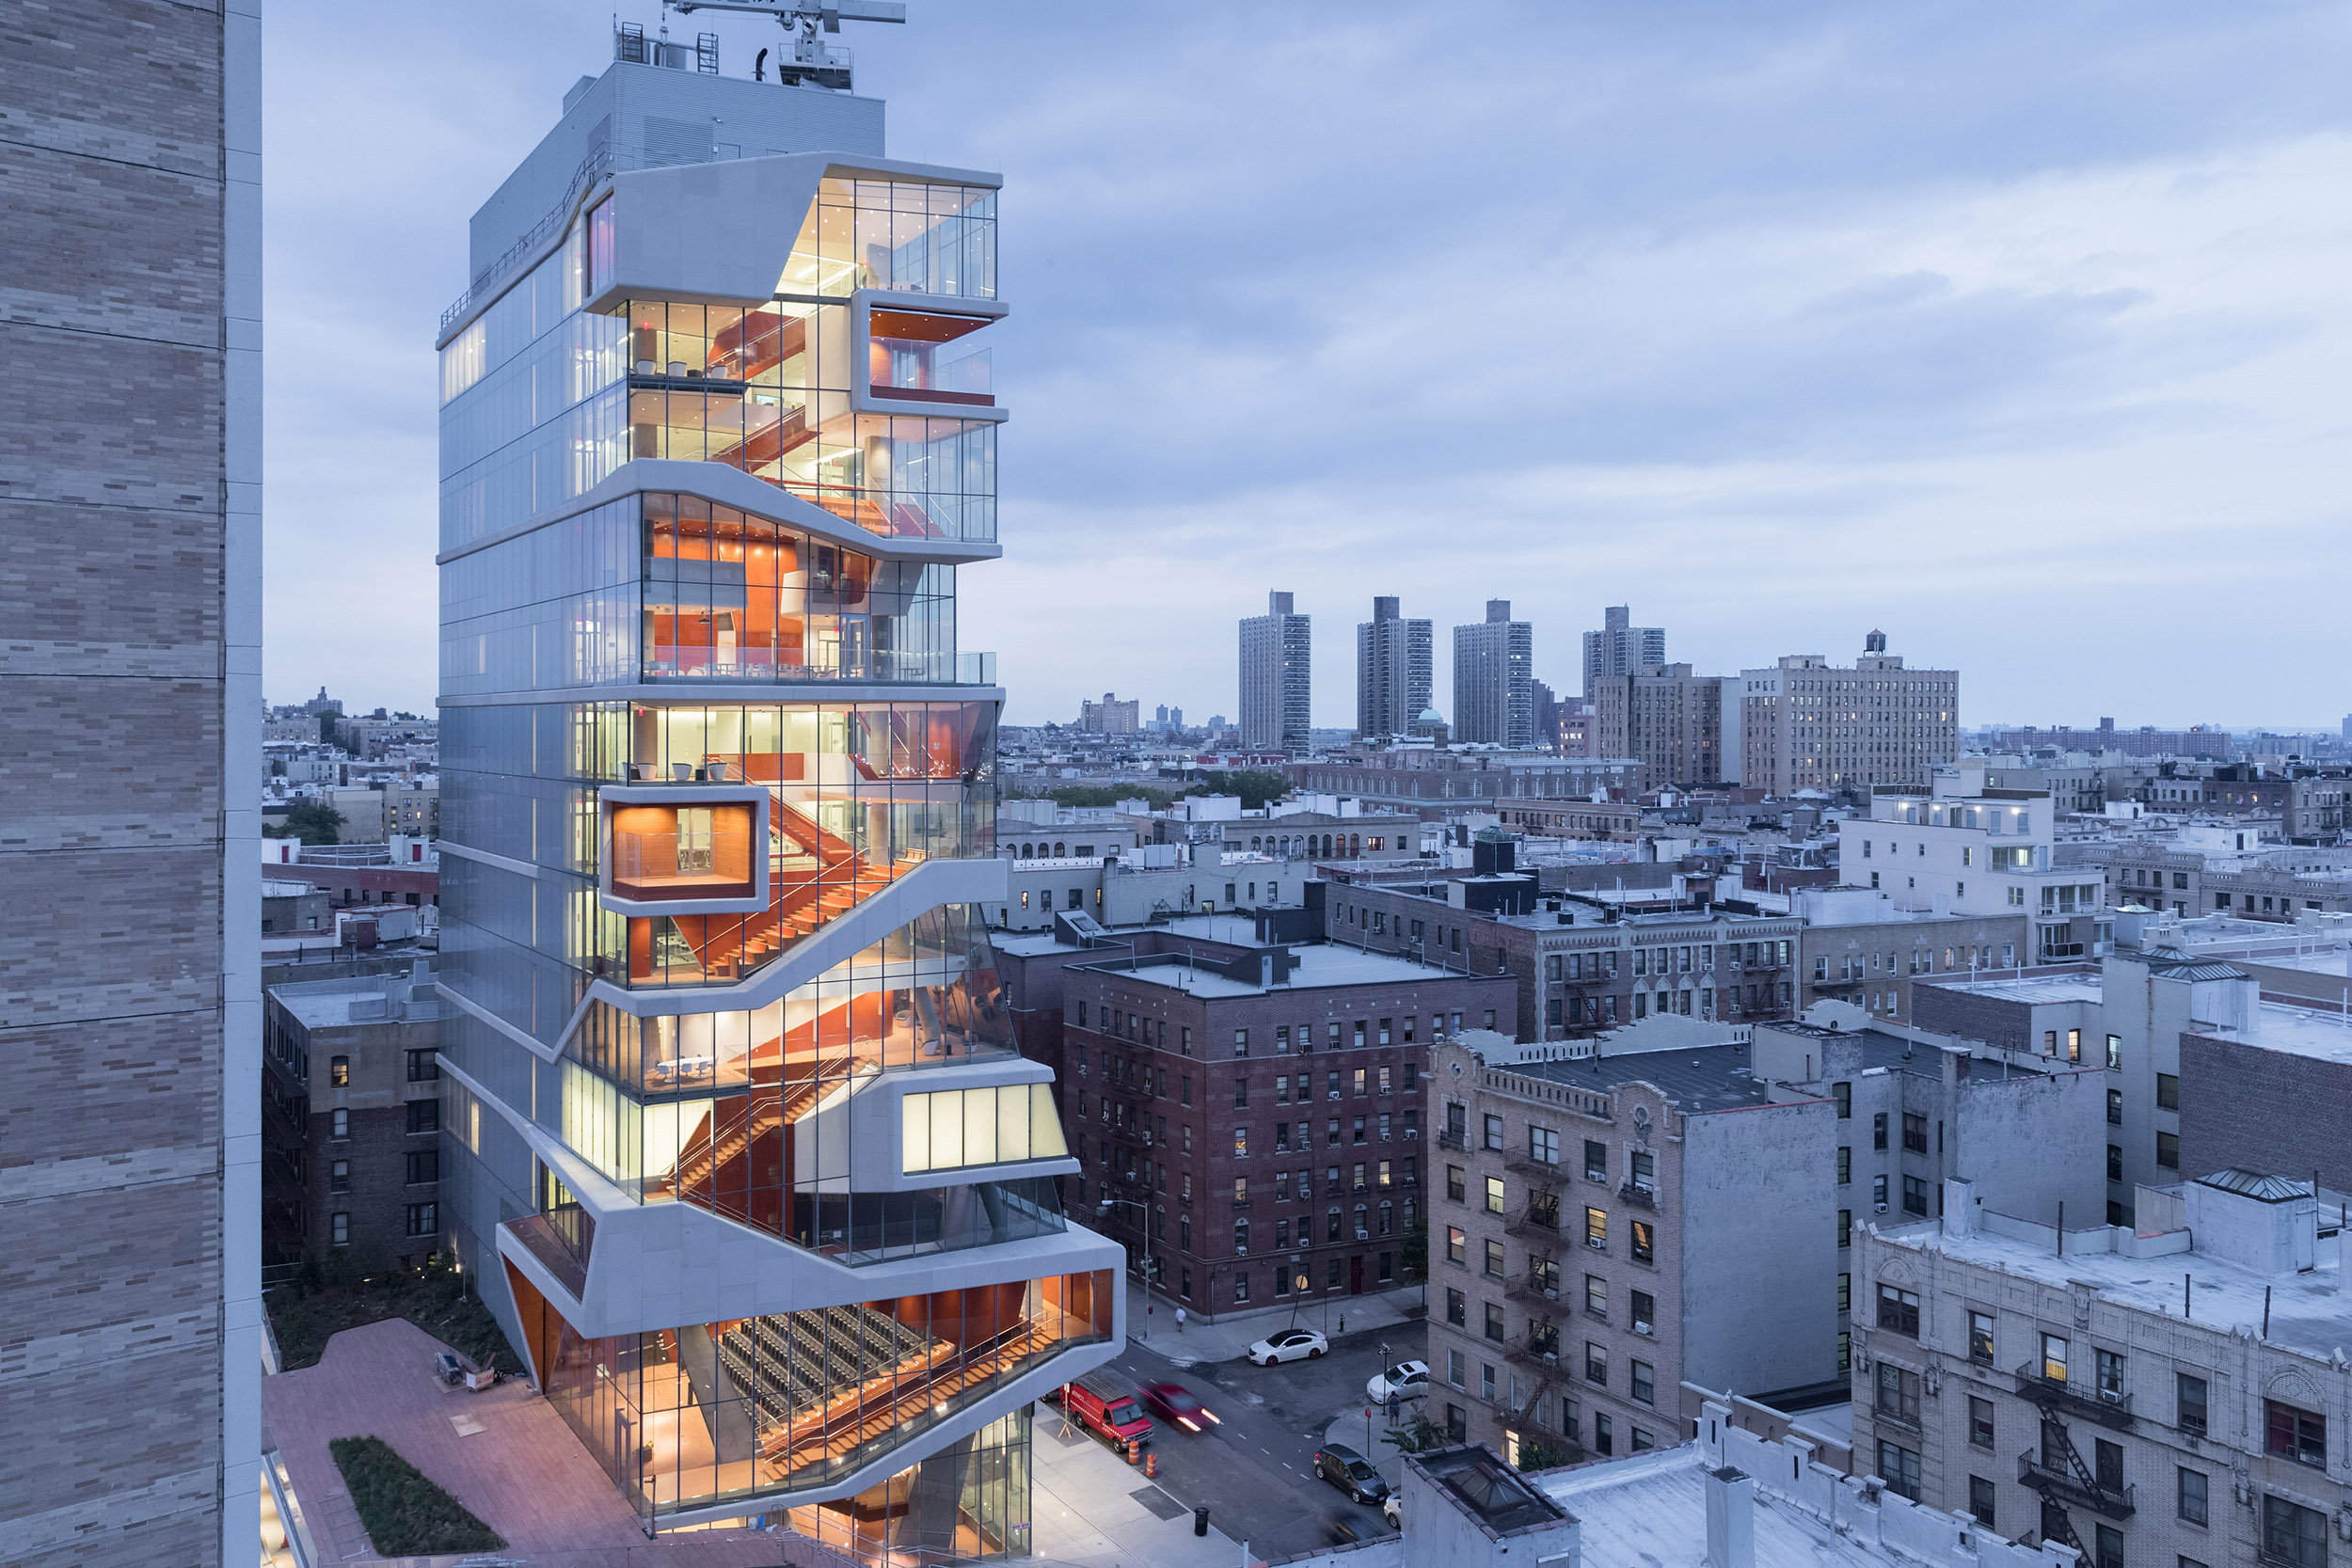 Best in Show Honor: Roy and Diana Vagelos Education Center, by Diller Scofidio + Renfro. Photo: Iwan Baan.